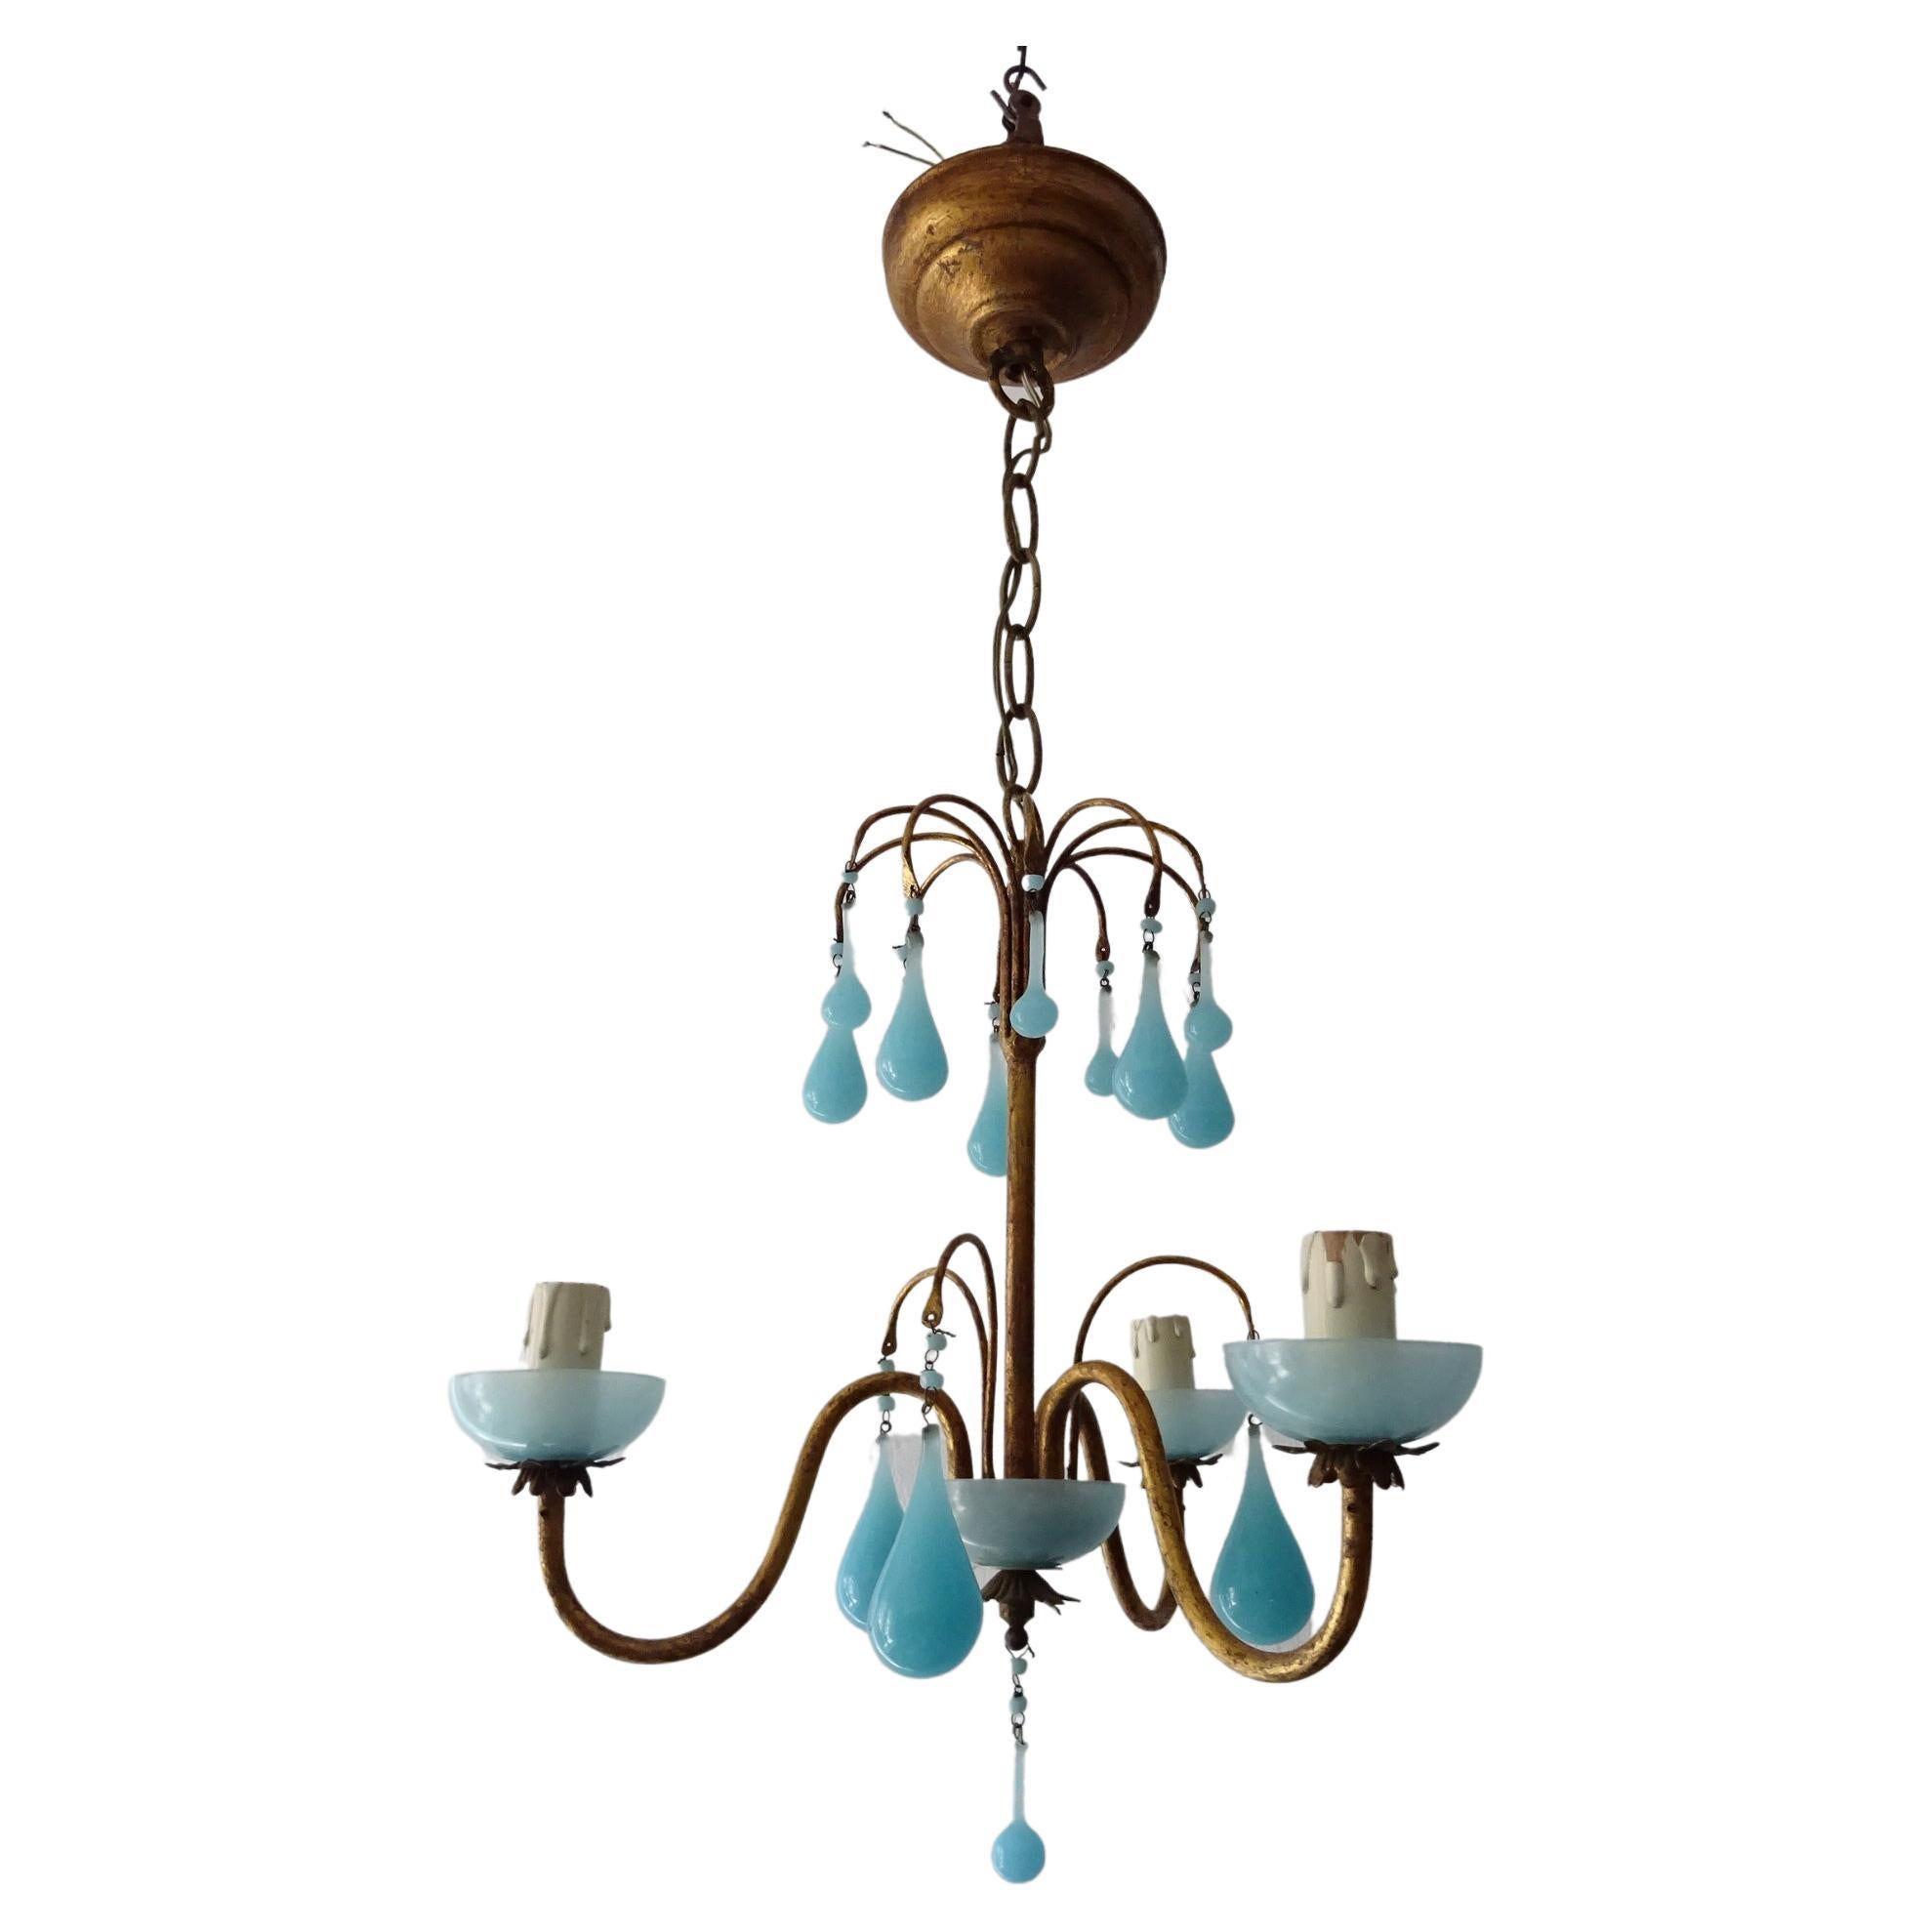 1930 French Blue Opaline Bobeches, Beads and Drops Chandelier For Sale